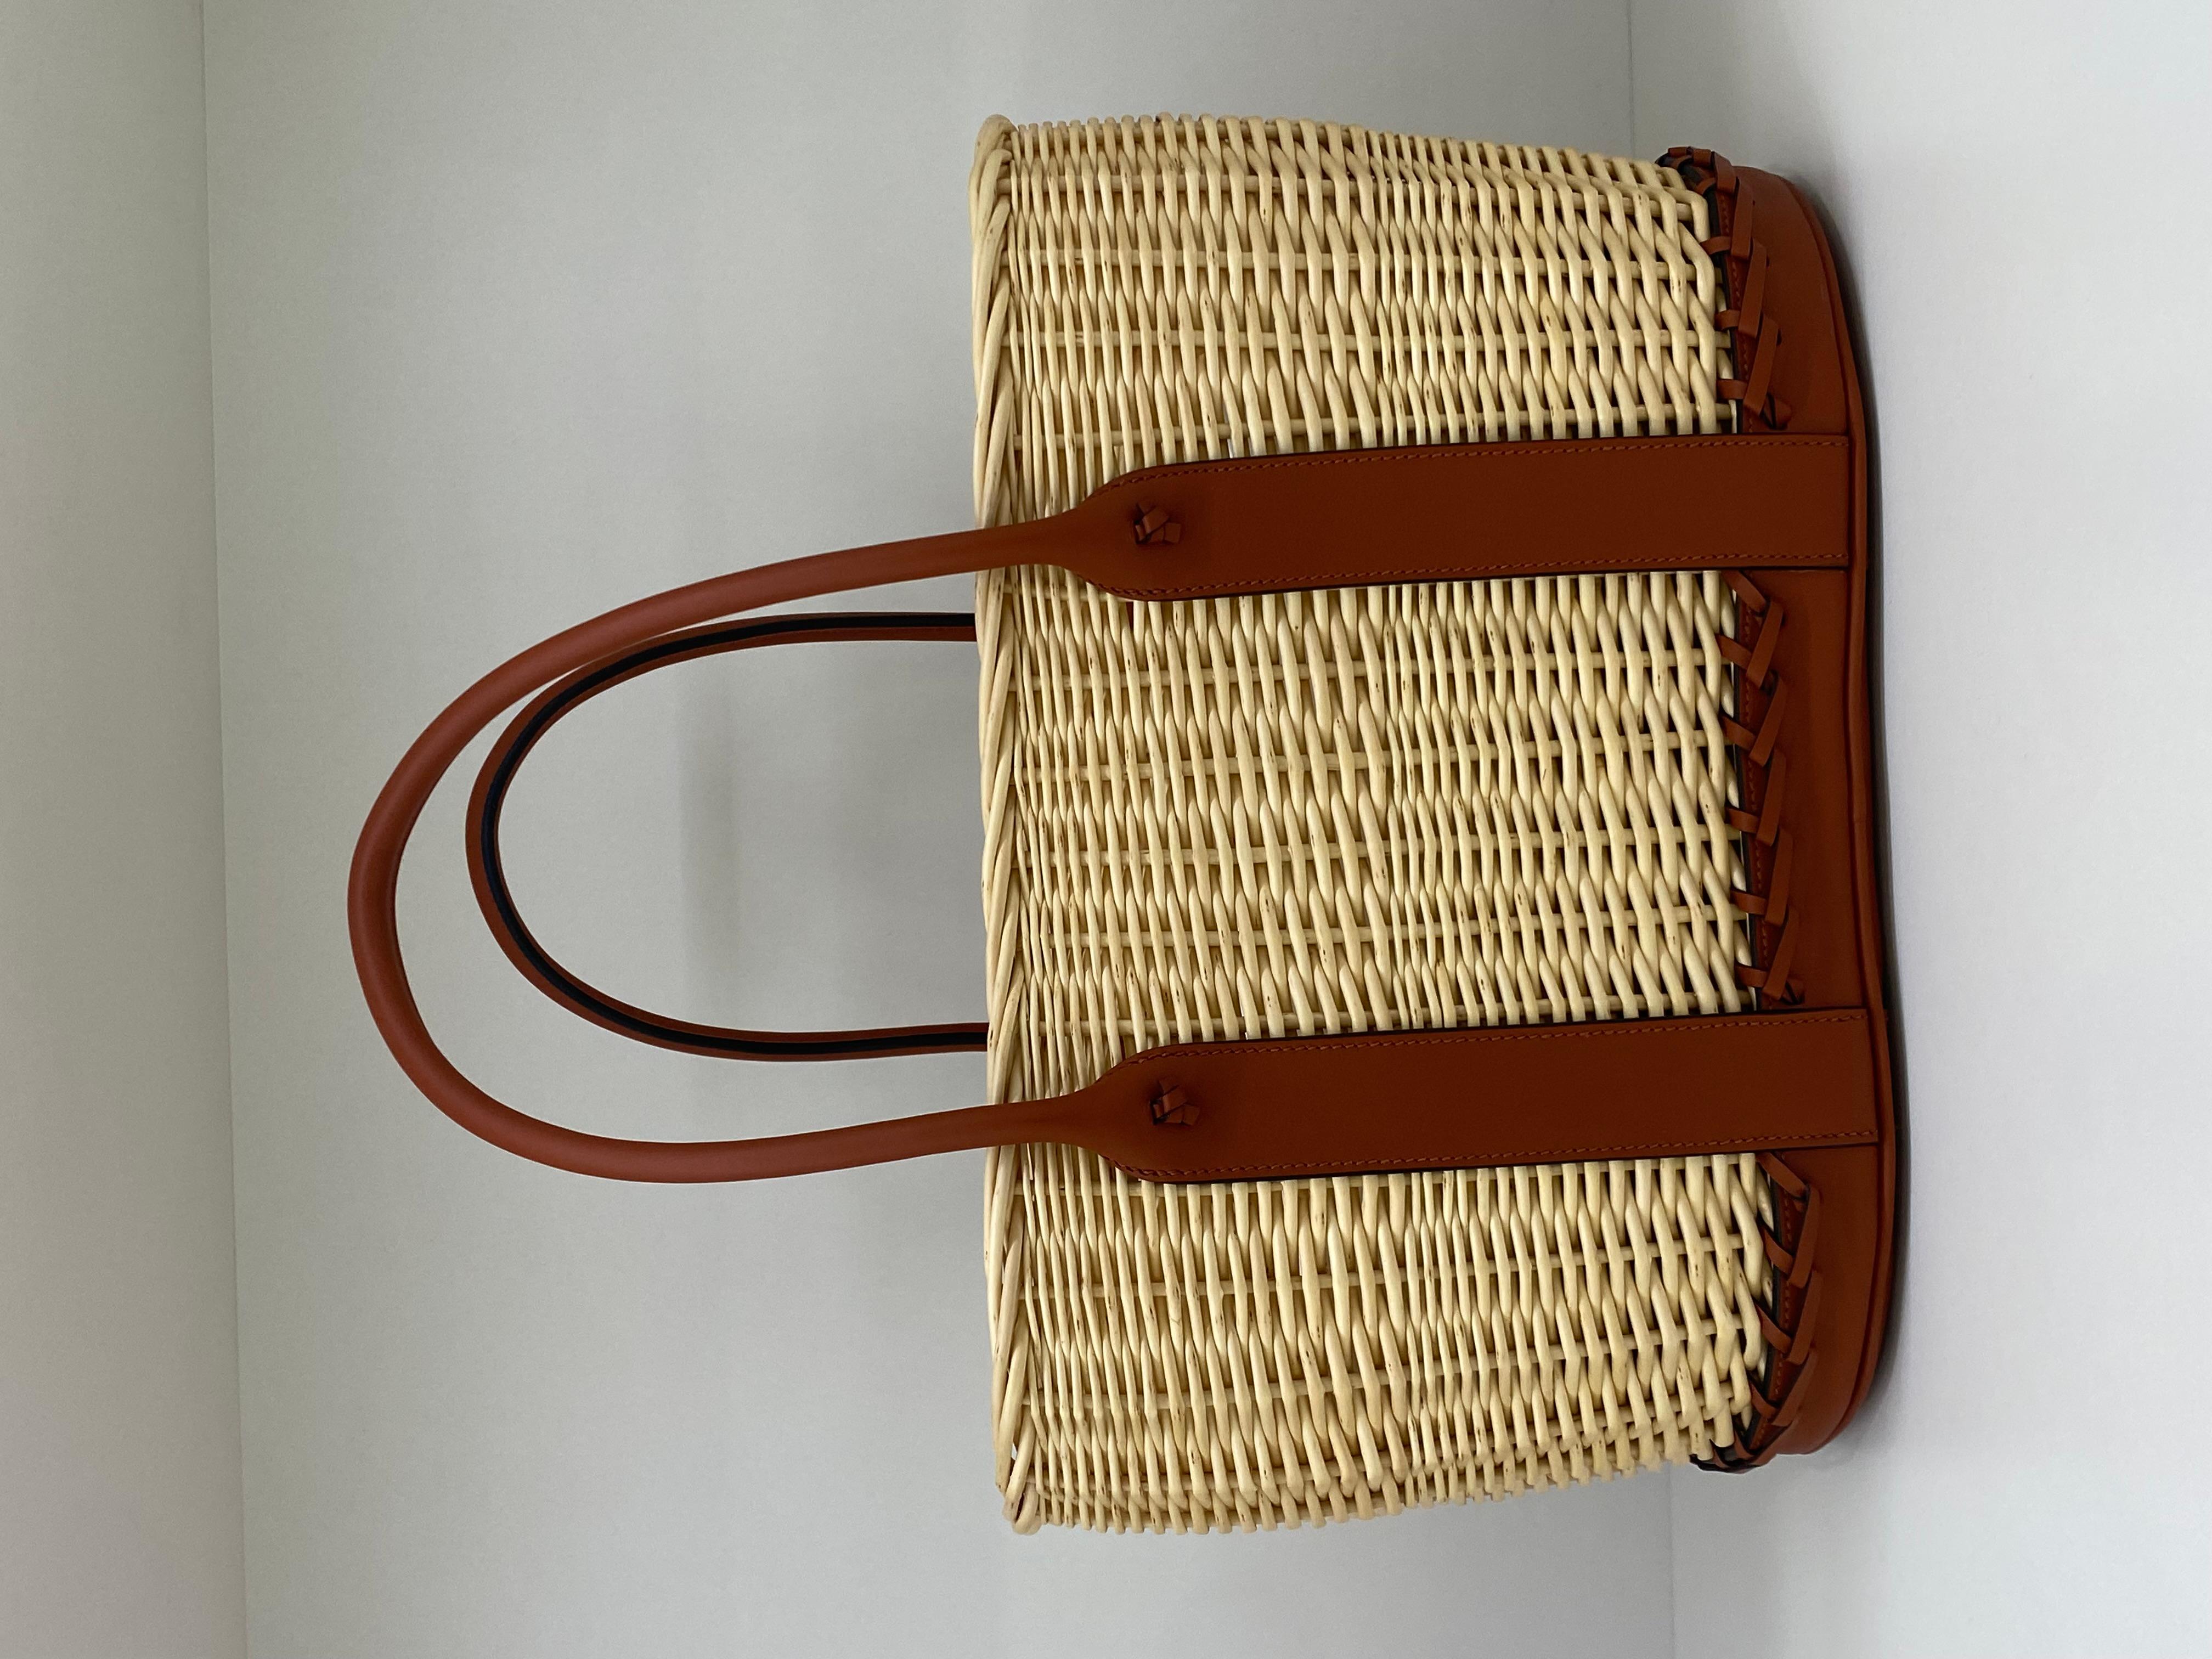 Hermes picnic basket barenia osier bag . Crafted from a combination of Osier Ratan Wicker and Barenia leather, This limited edition basket features contrast white stitching throughout. The light brown color of the wicker compliments the dark brown